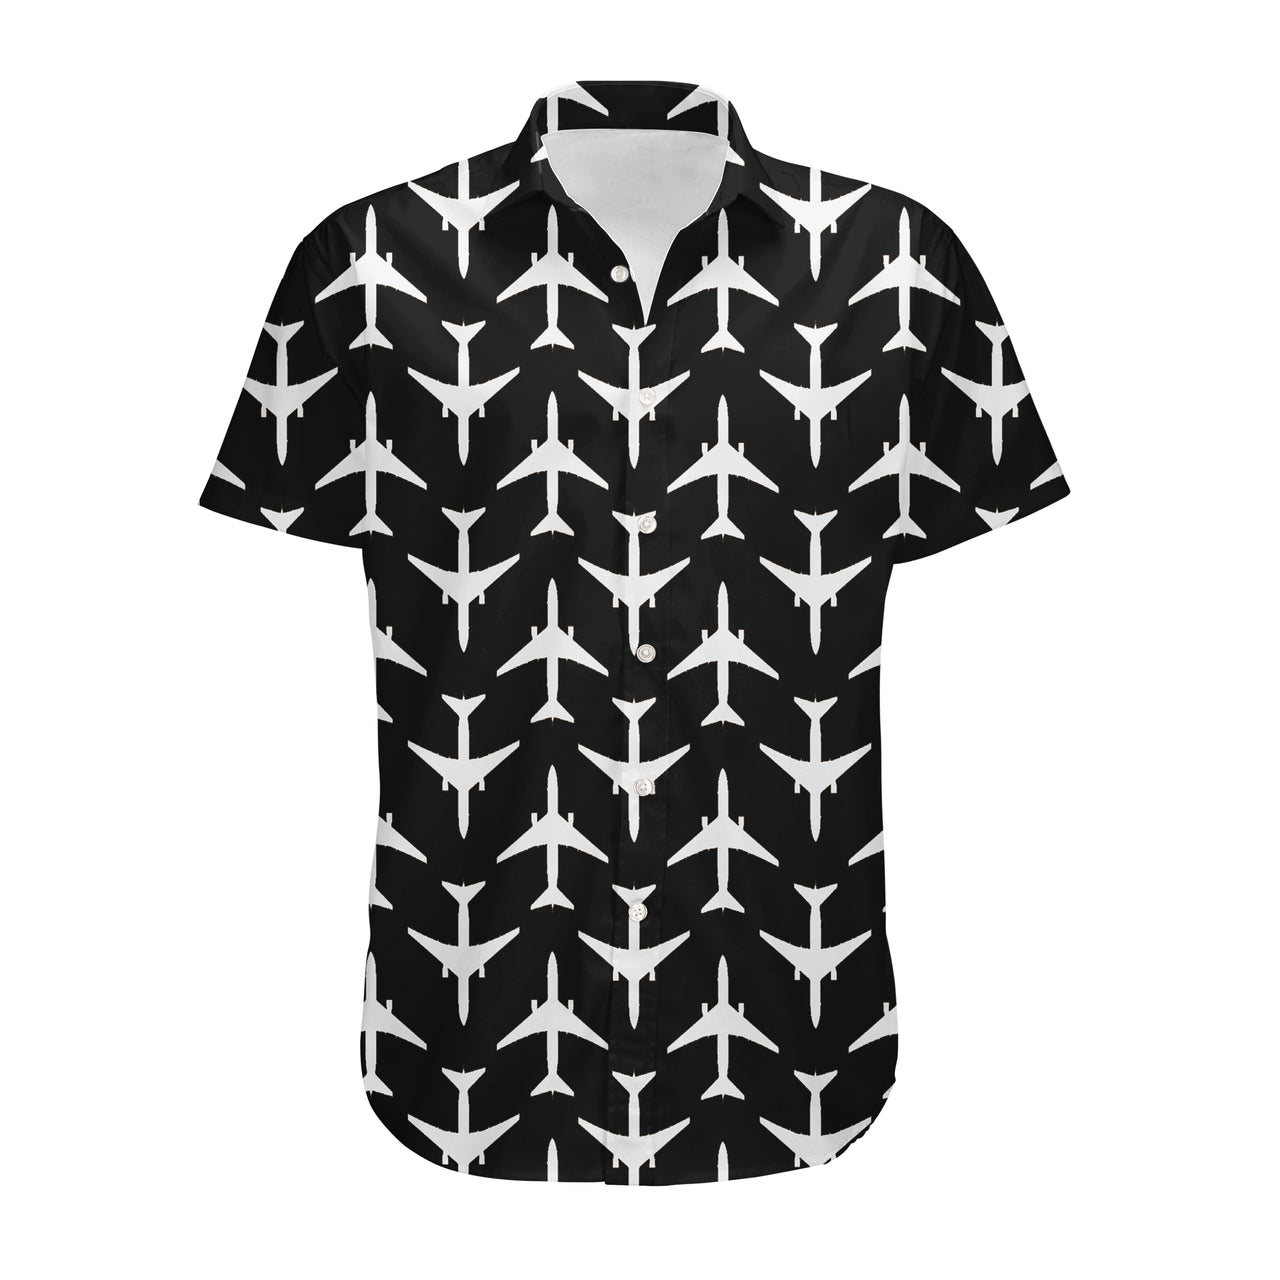 Perfectly Sized Seamless Airplanes Black Designed 3D Shirts